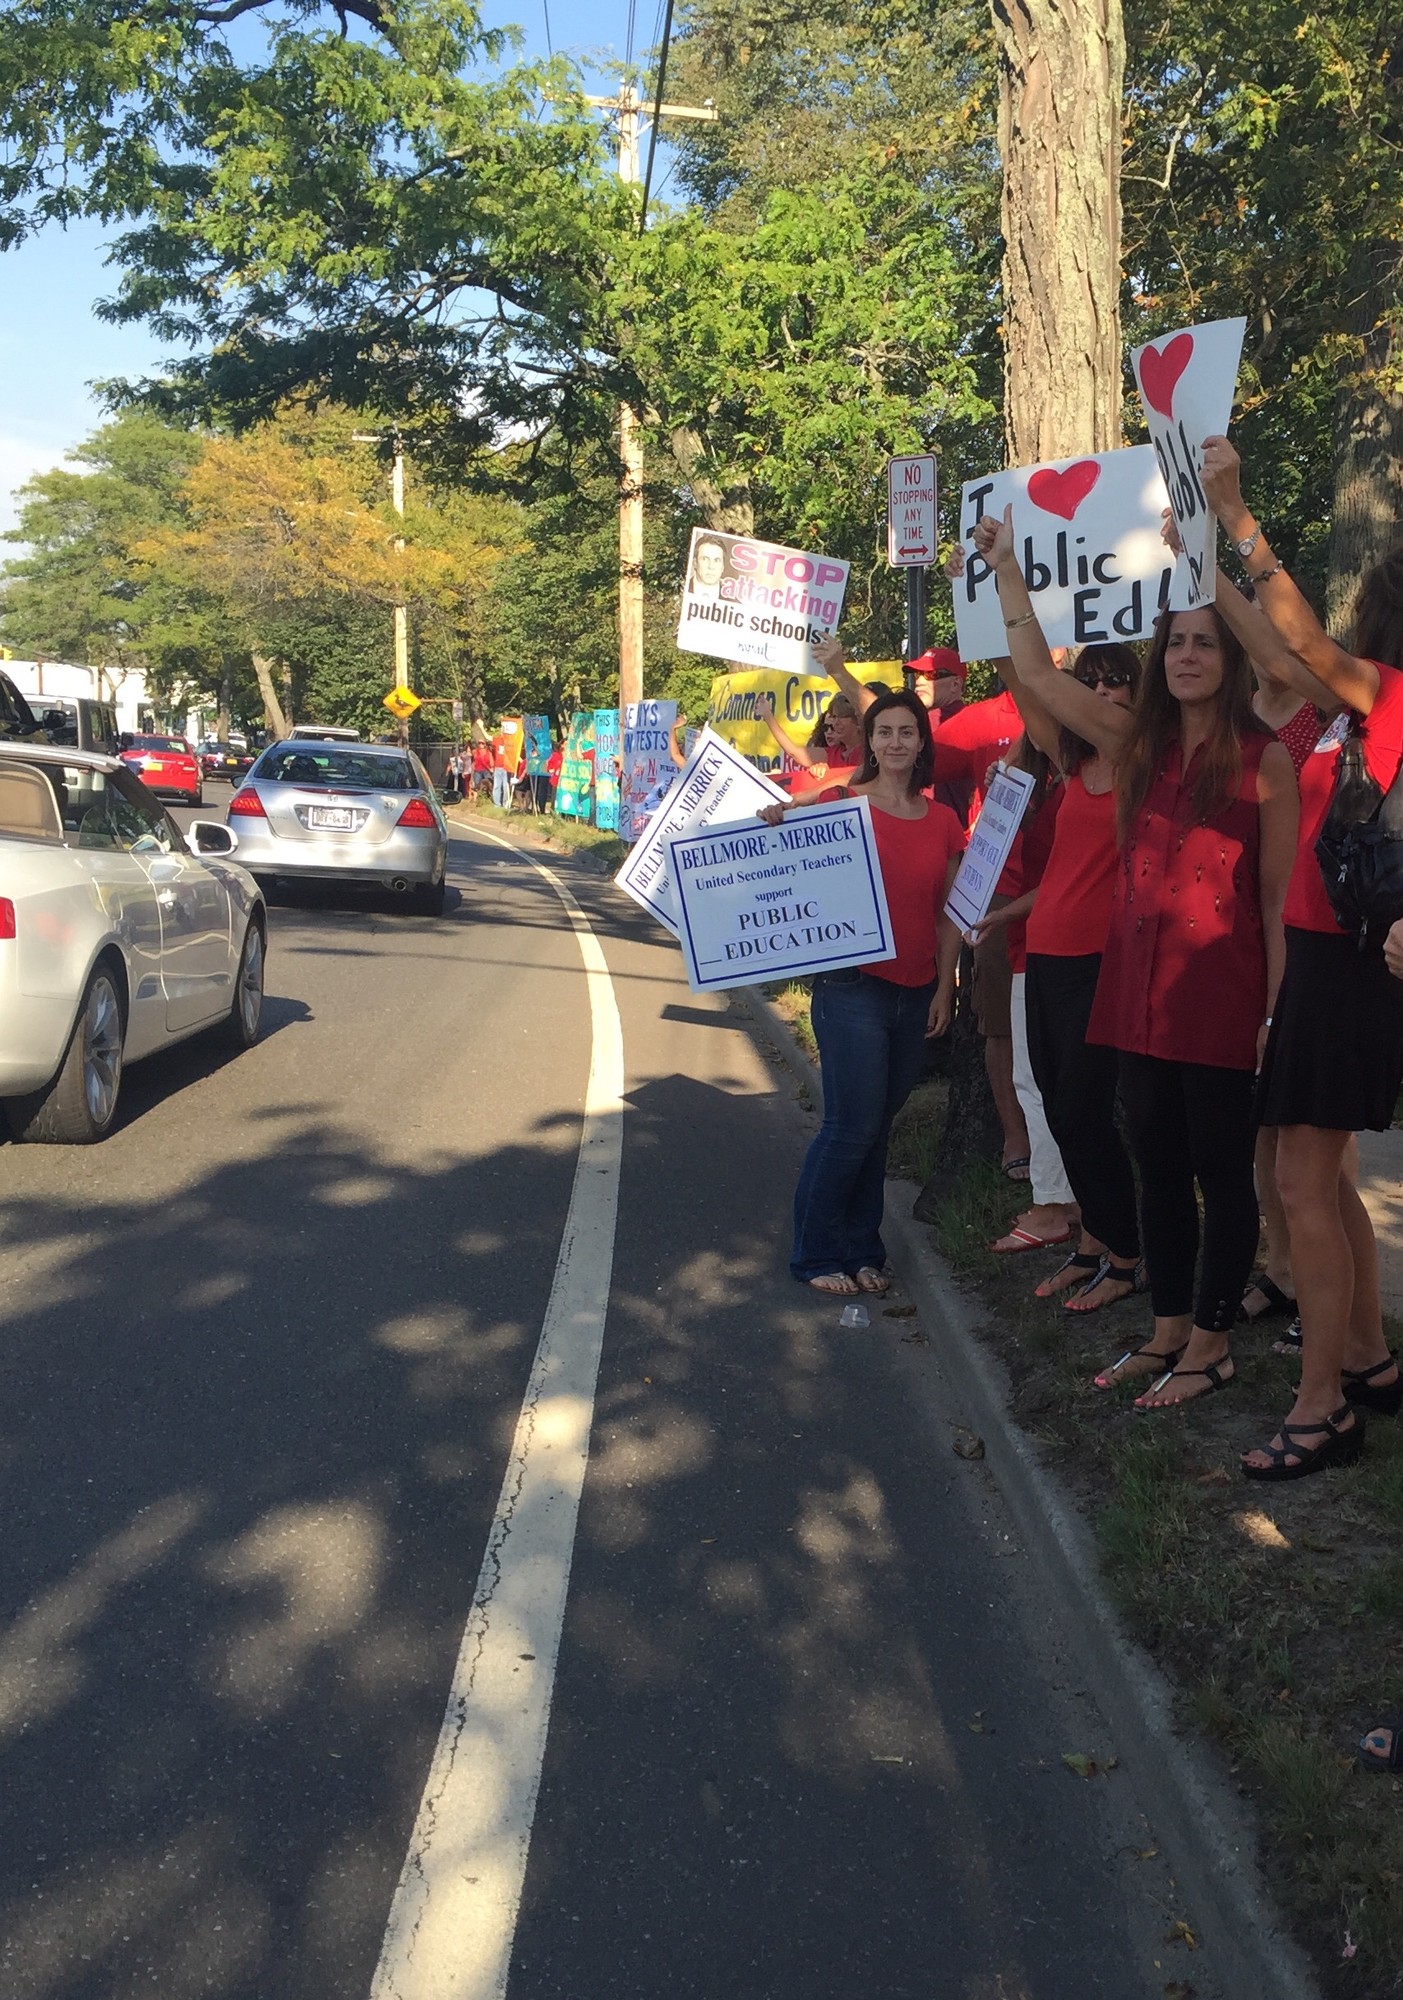 Teachers urged Merrick Road motorists to honk their car horns in support of public education.